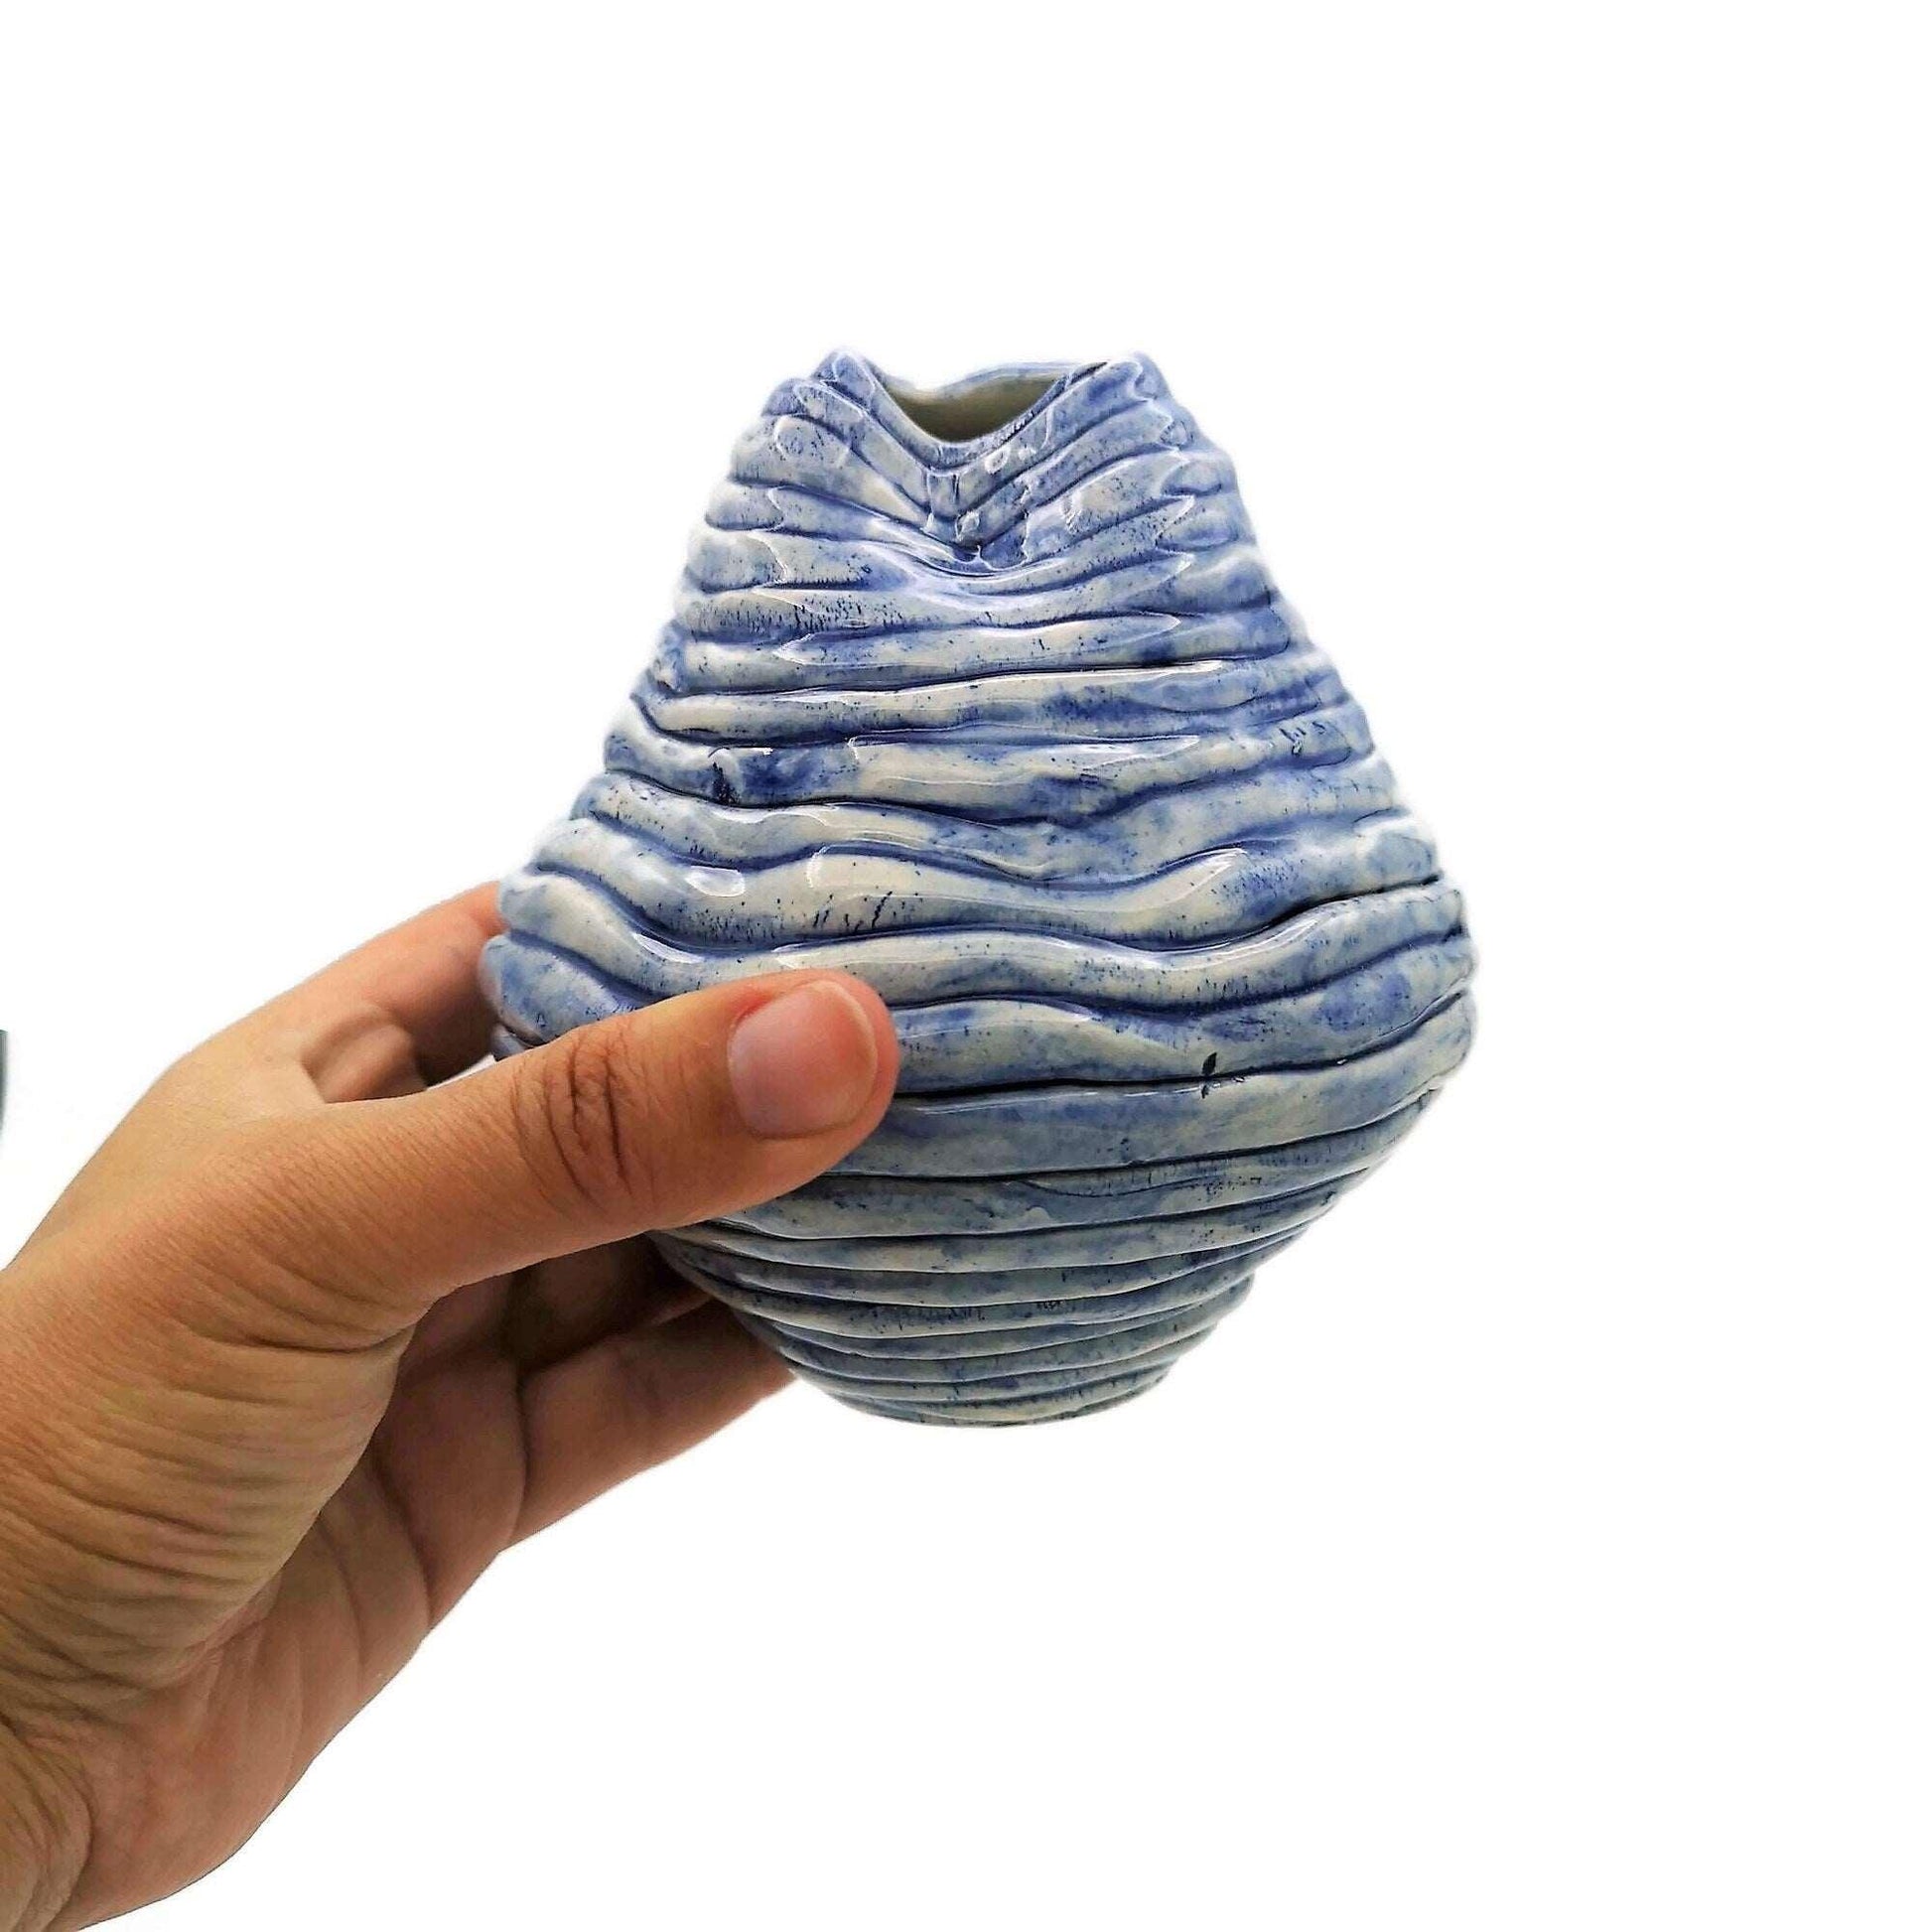 1pc Blue Handmade Ceramic Small Vase Irregular Shaped Pottery Abstract Sculpture Ceramic Vessel Best Sellers Mom Birthday Gift From Daughter